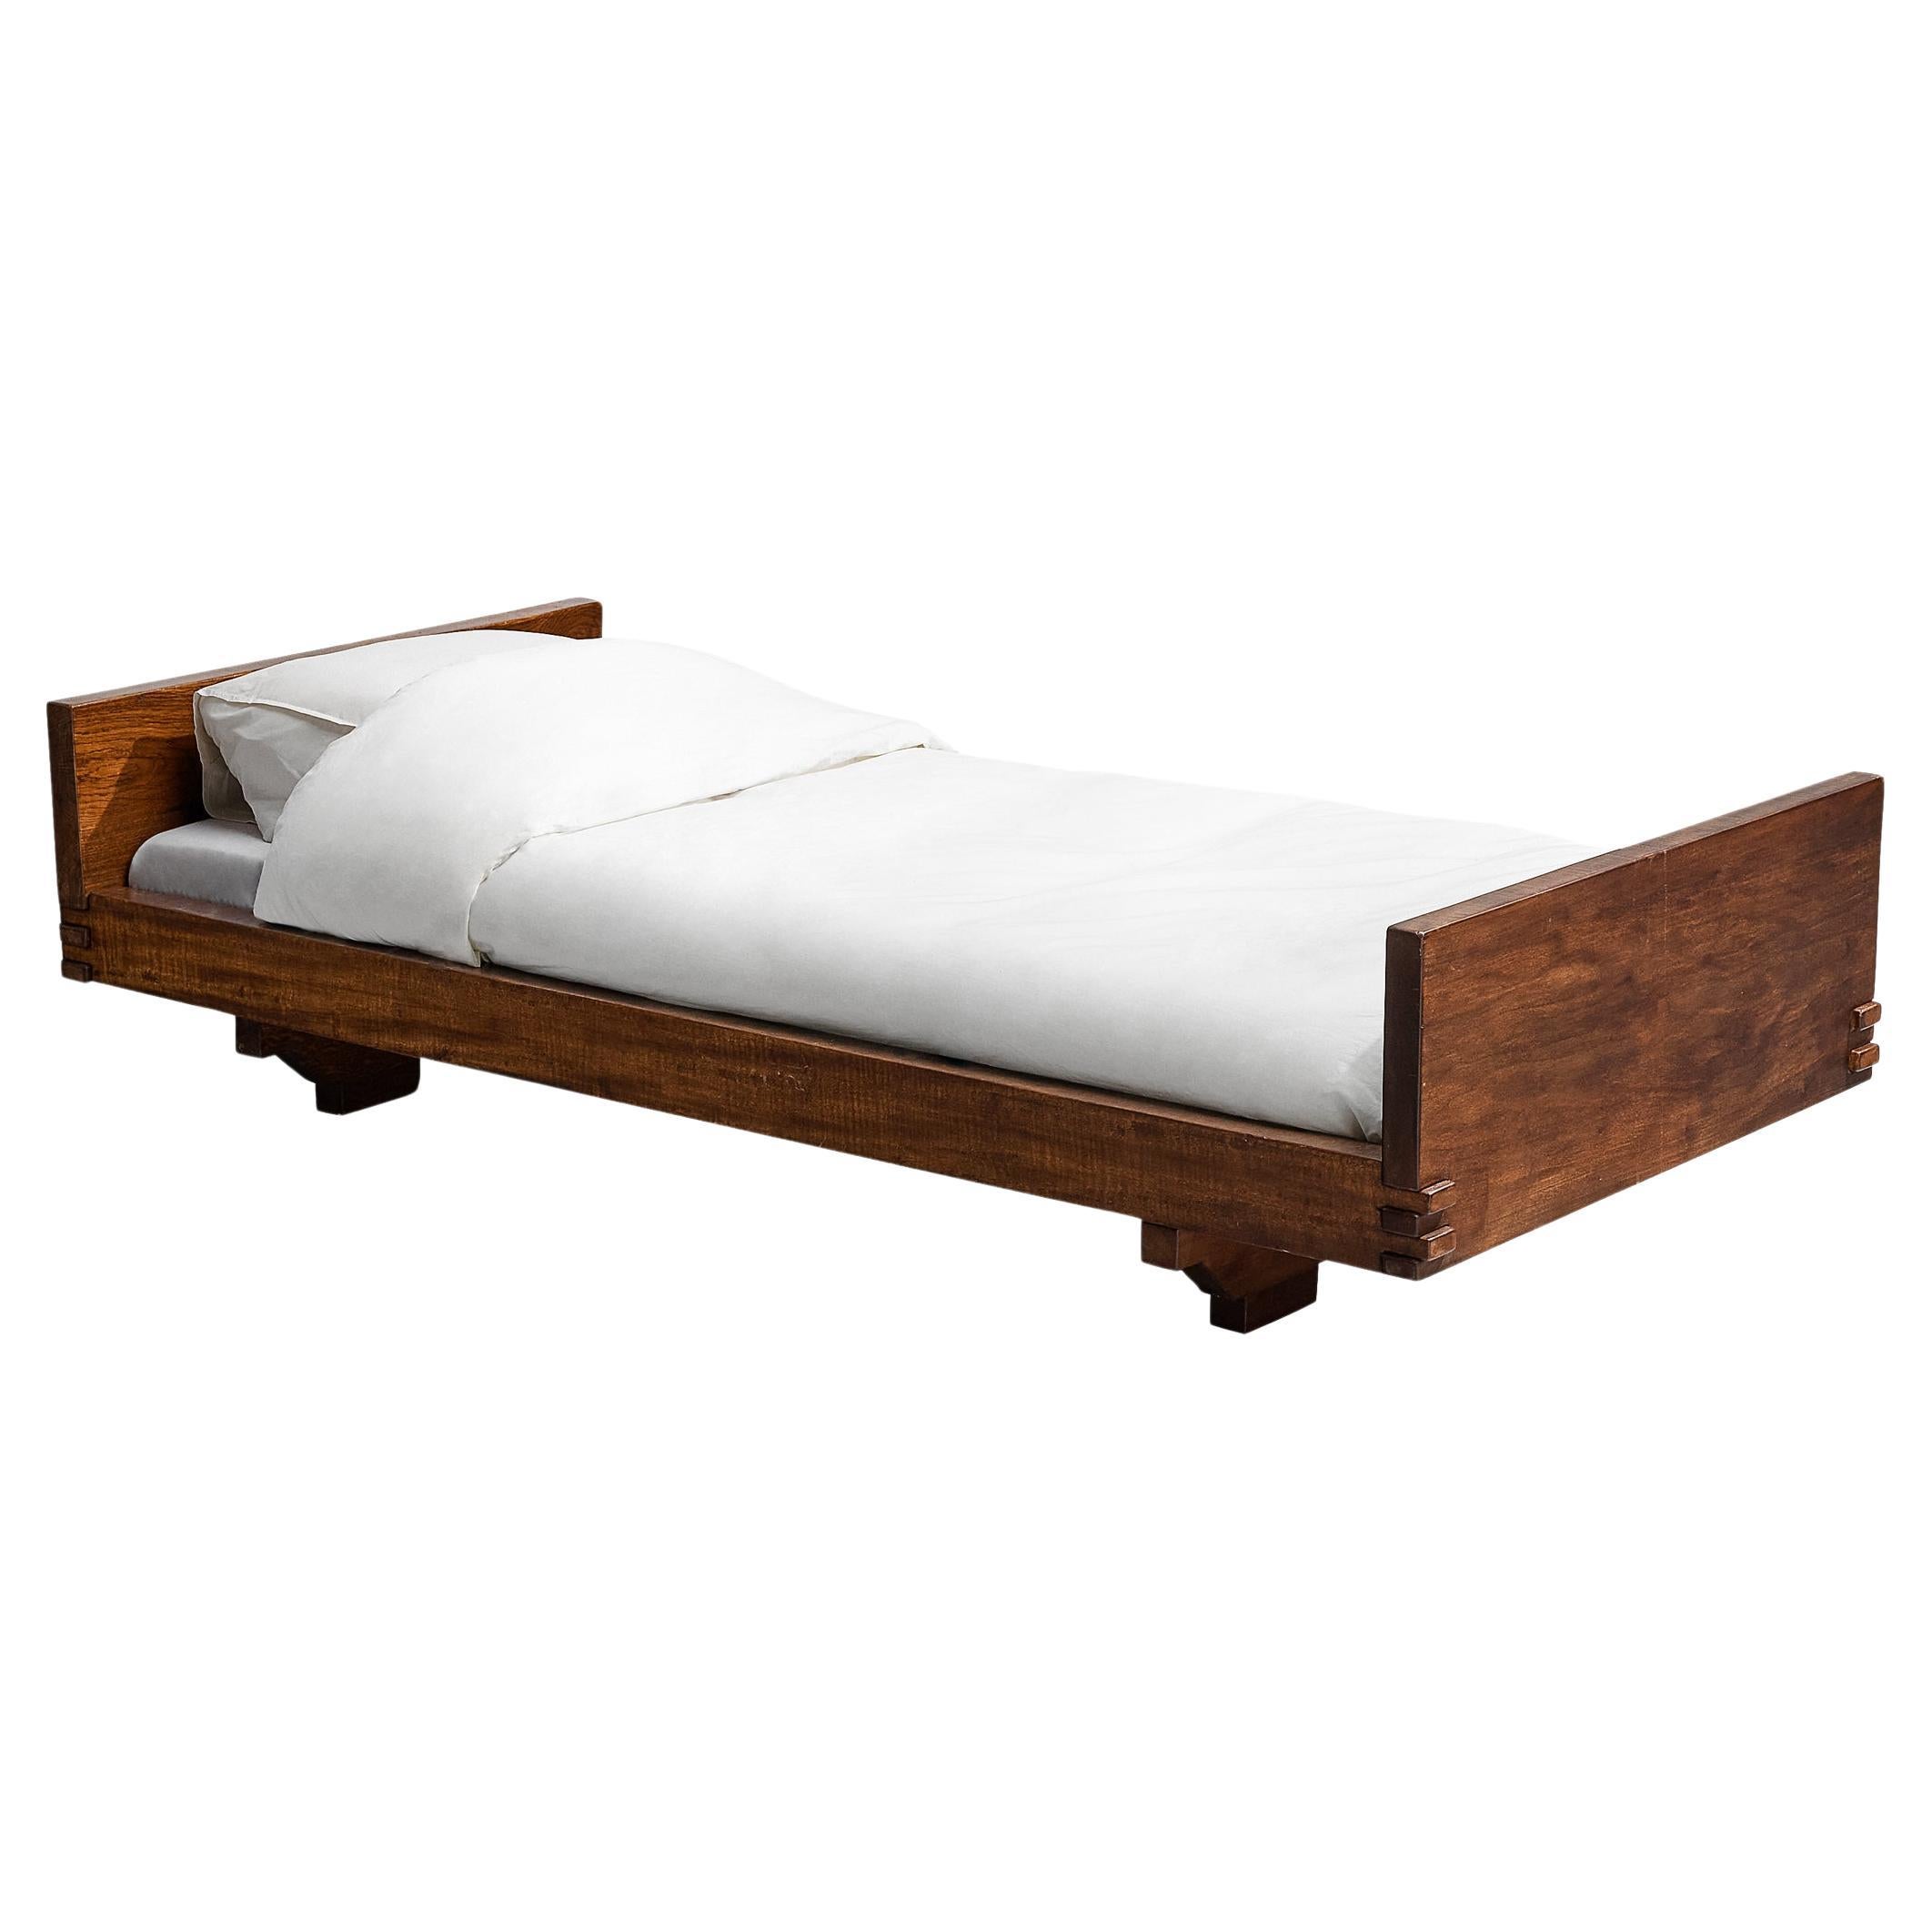 Giuseppe Rivadossi for Officina Rivadossi Single Bed in Walnut 